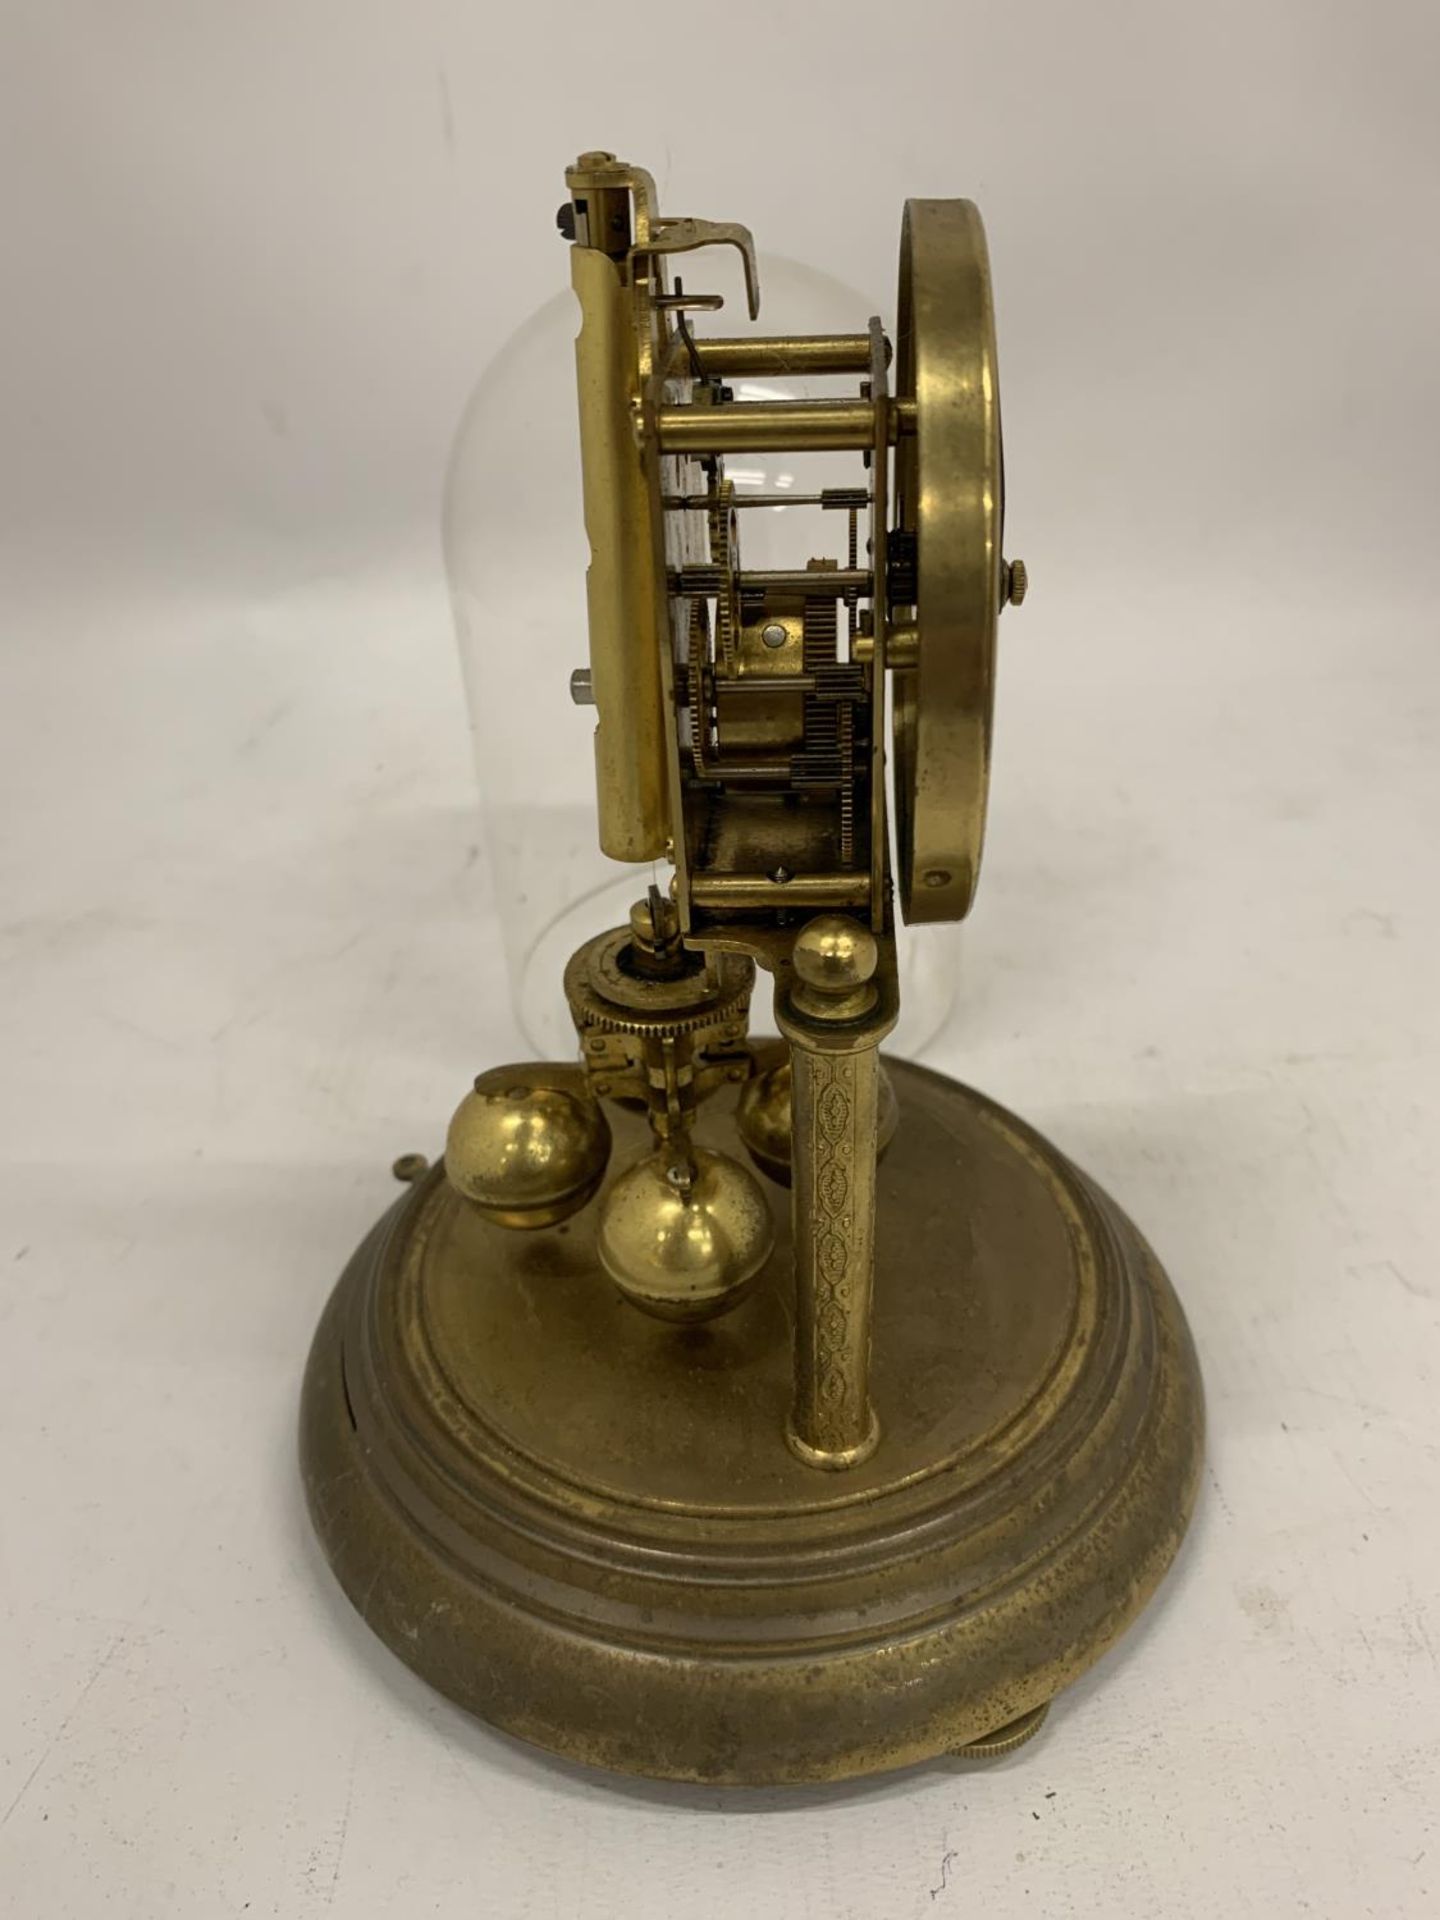 A BRASS ANNIVERSARY CLOCK WITH A DOME - Image 2 of 4